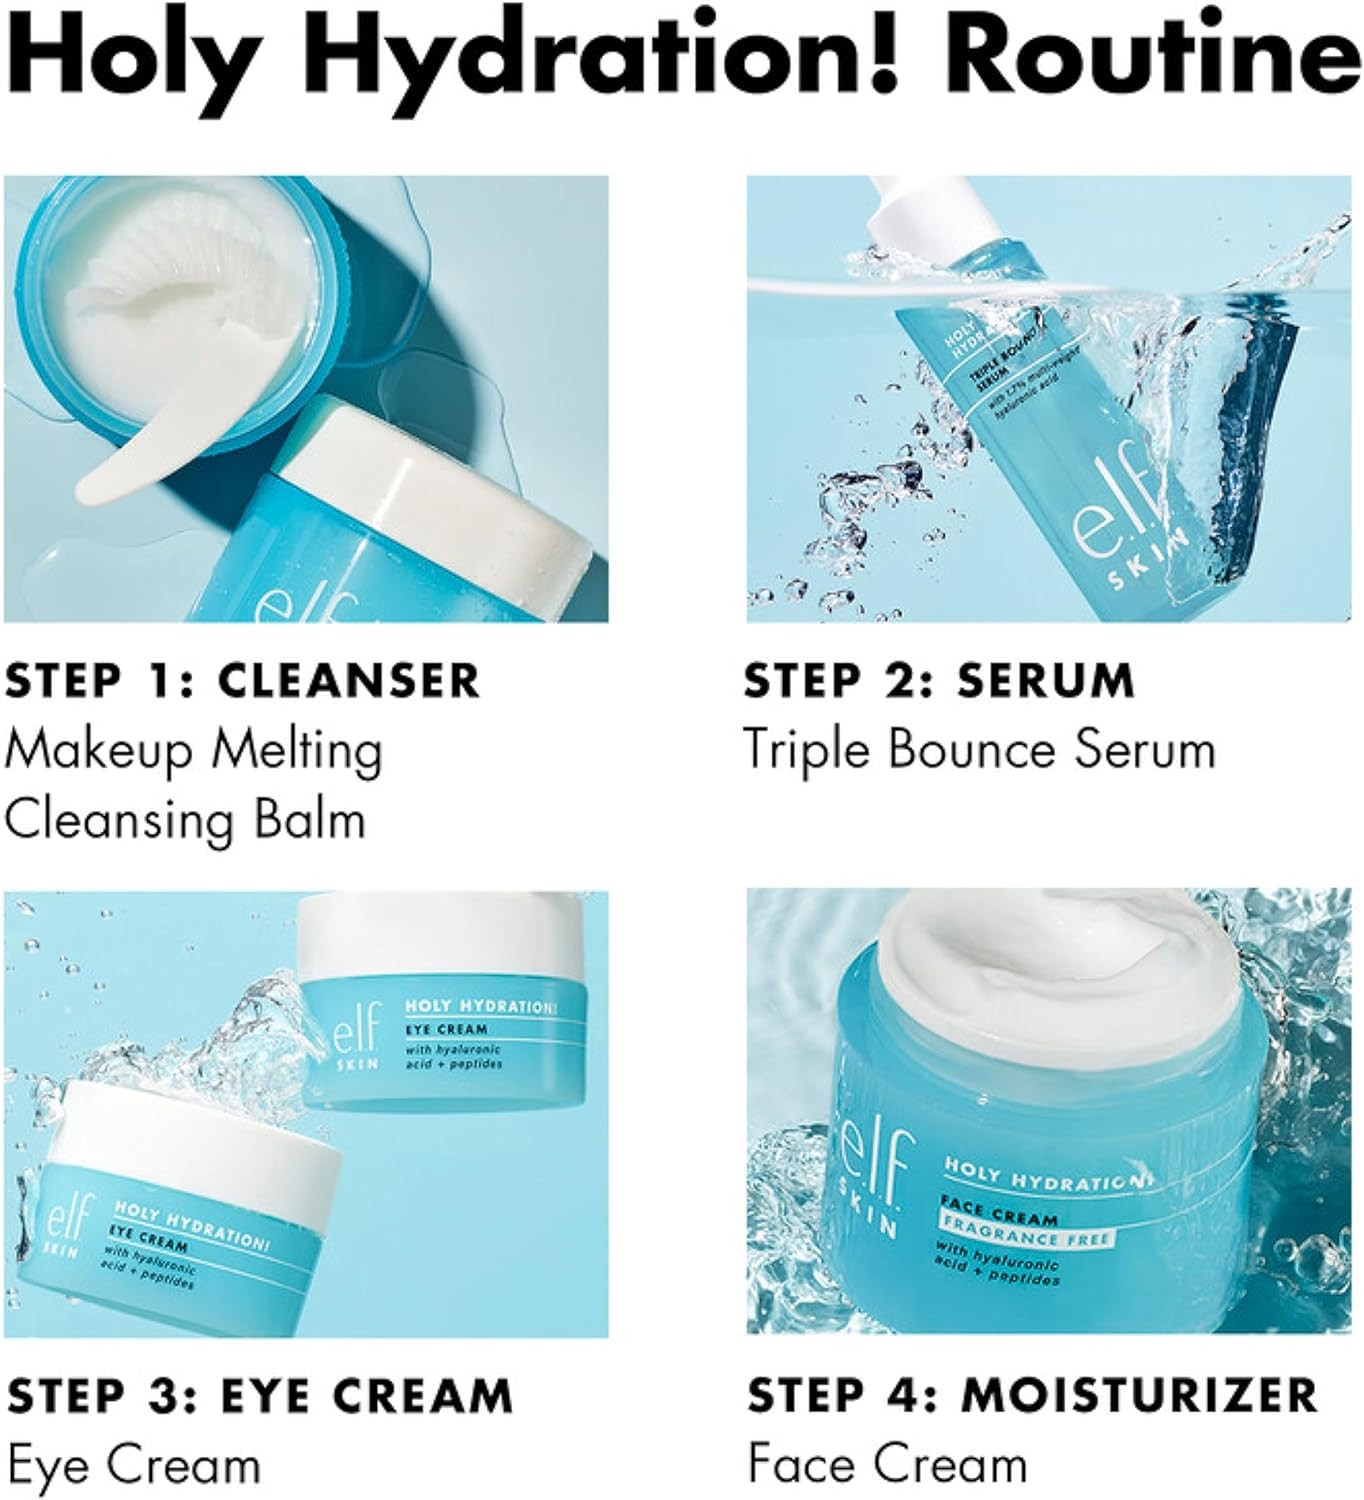 e.l.f. Holy Hydration! Face Cream with Hyaluronic Acid + Peptides 50 g